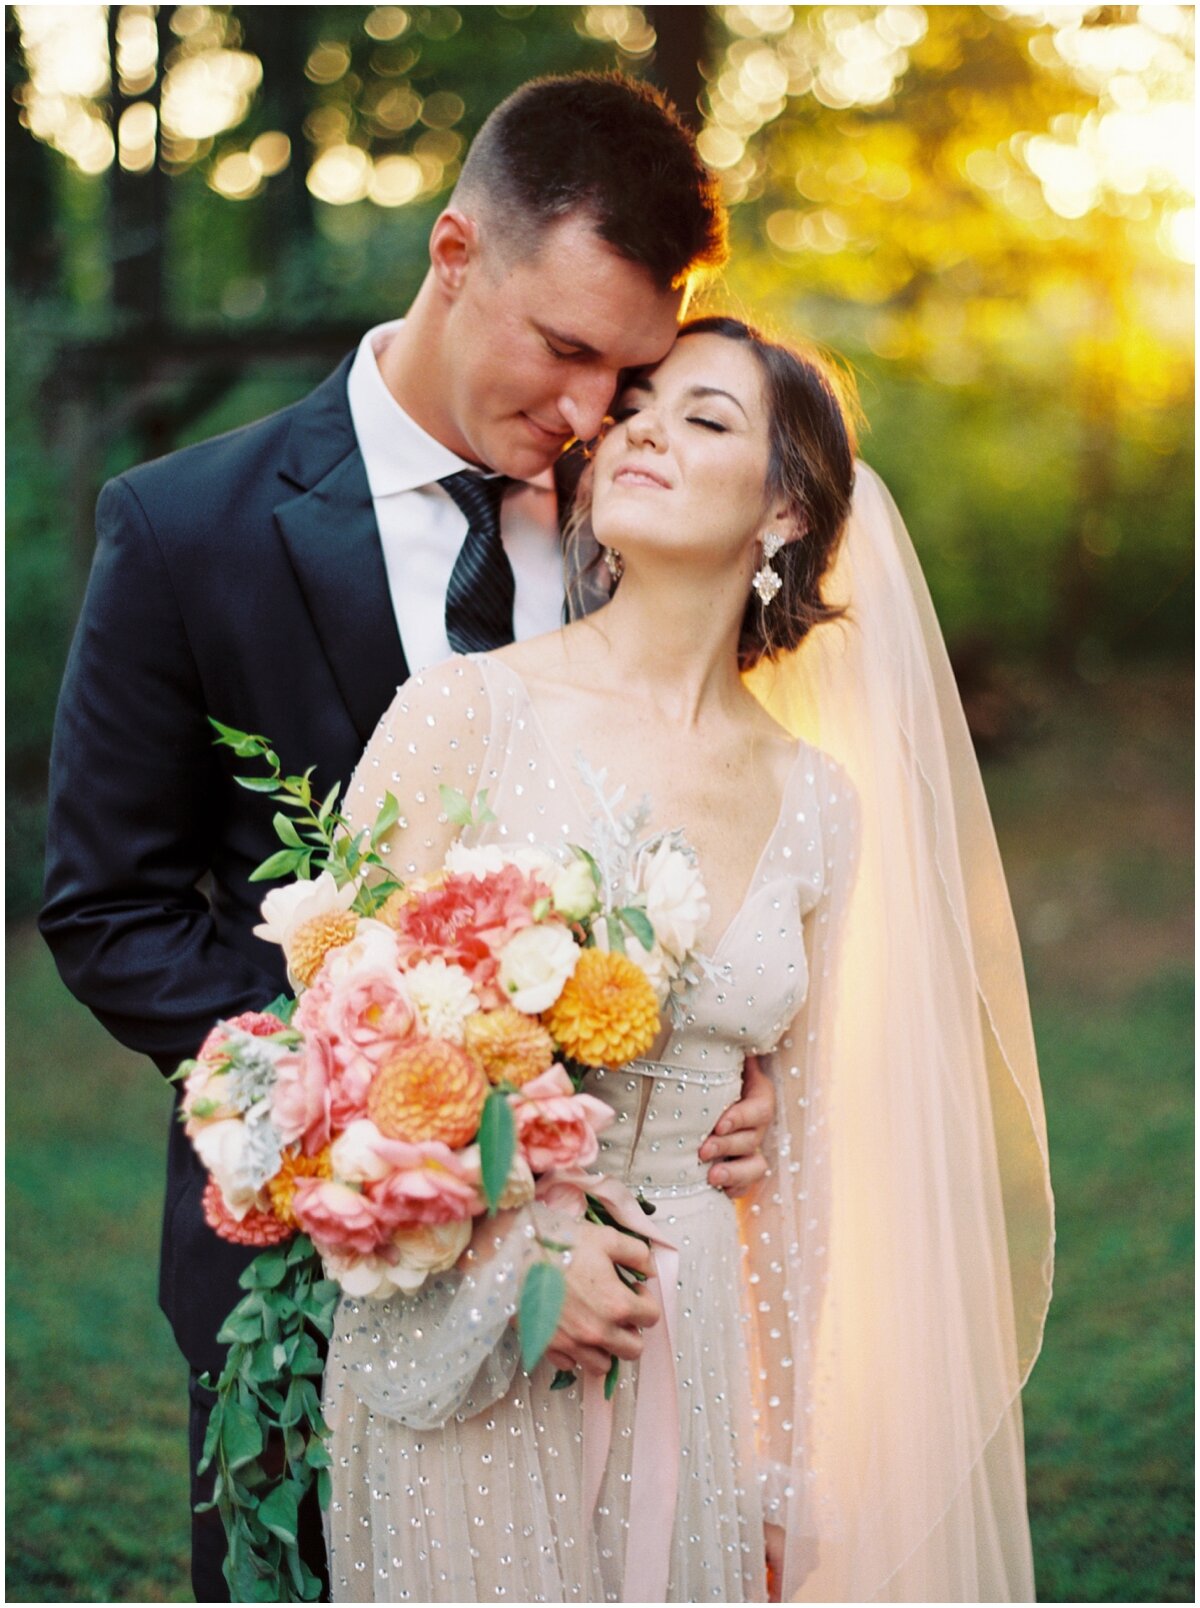 bride and groom portraits outdoor wedding knoxville tn peach green gold bouquet 